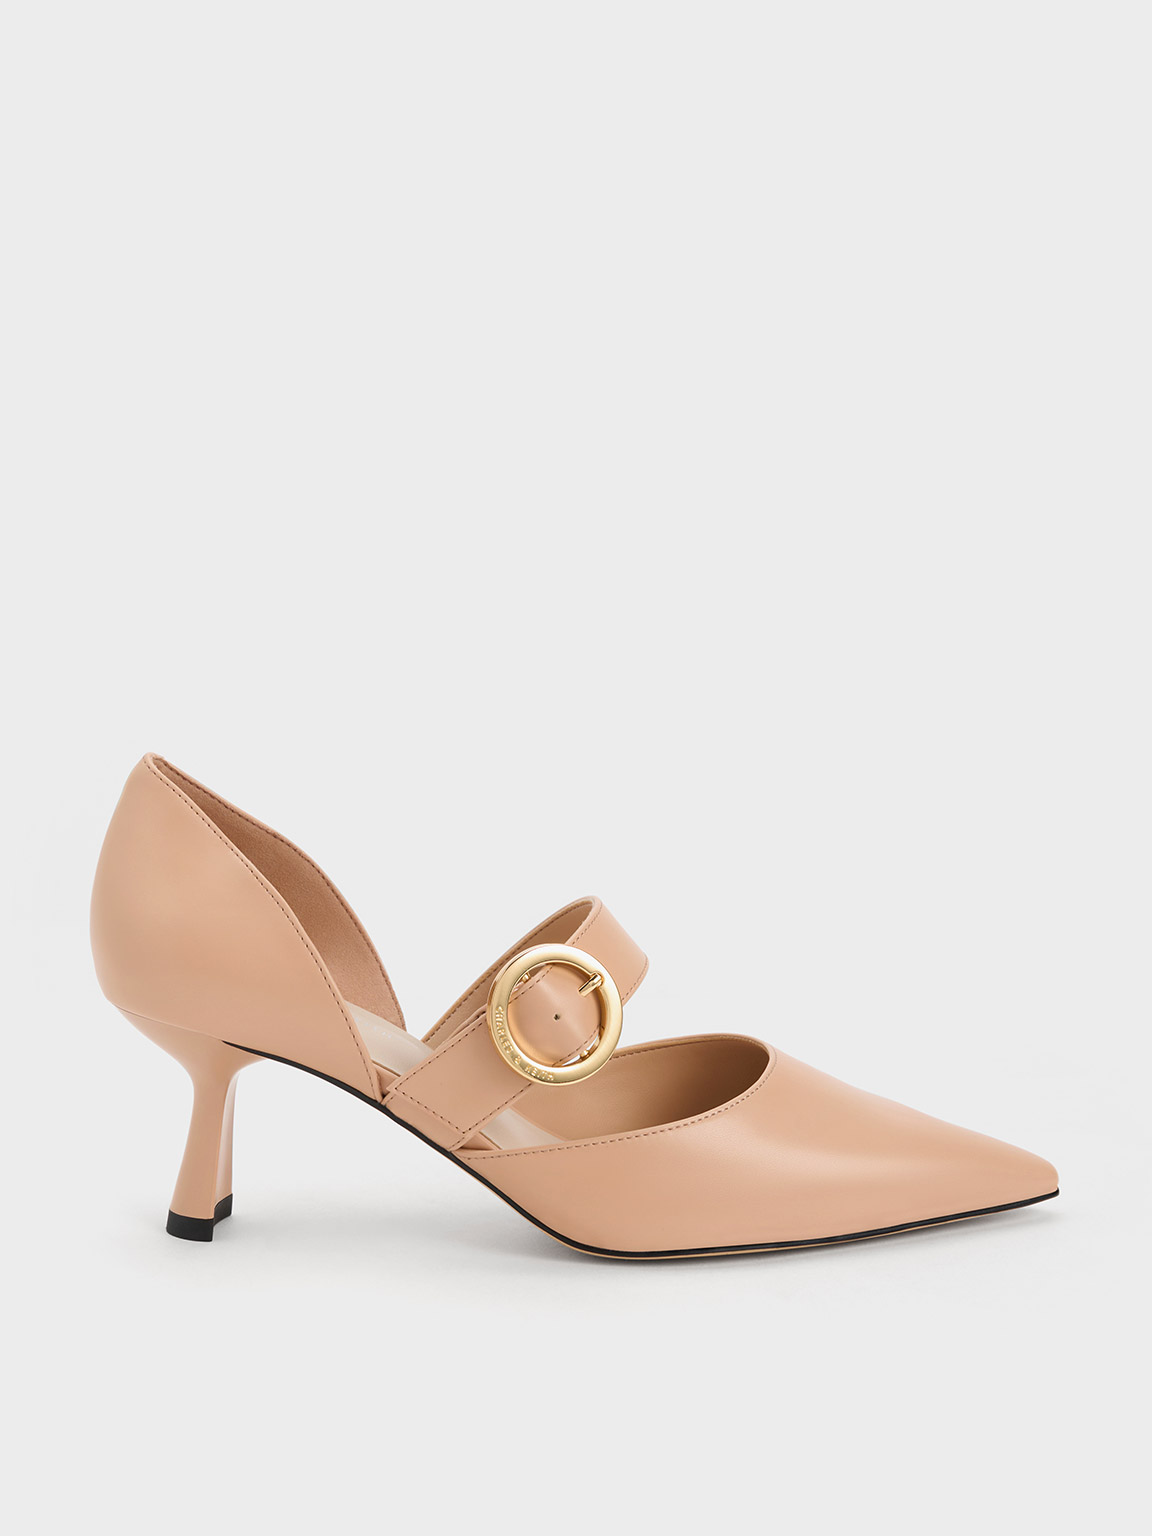 Buckled D’Orsay Pumps